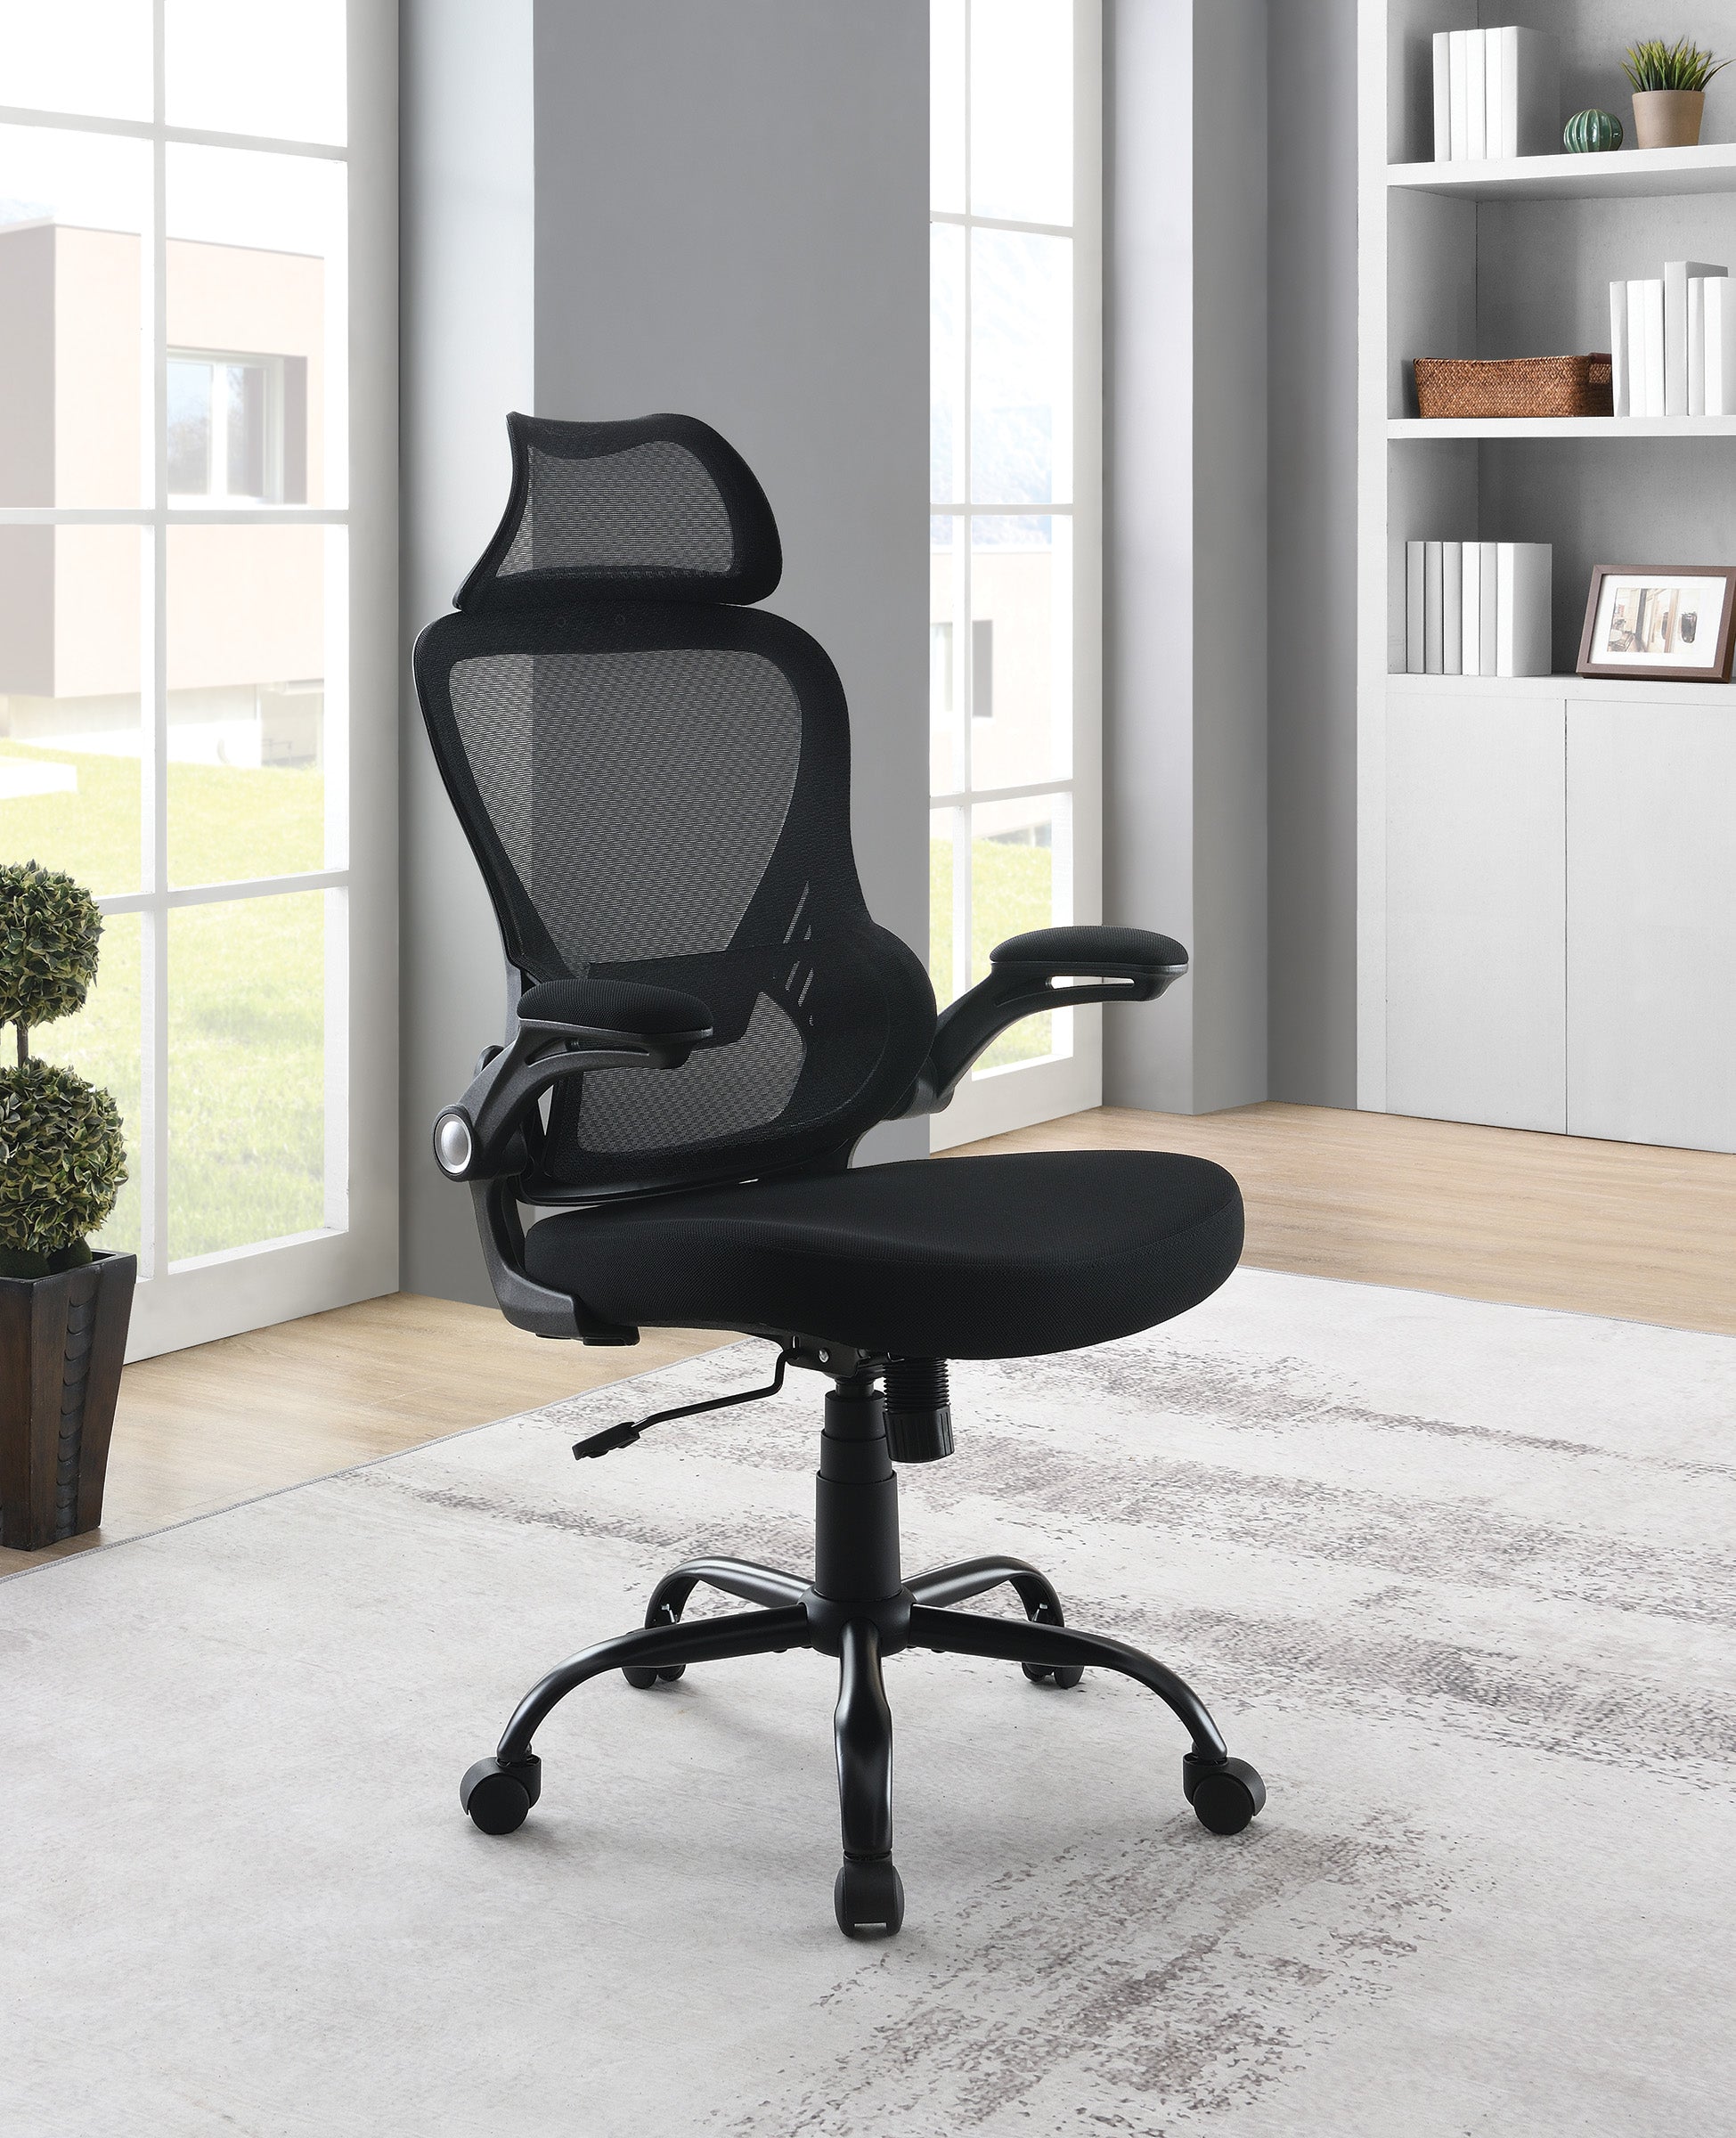 EM60946HR - Mesh Back Manager's Chair with Headrest by Office Star